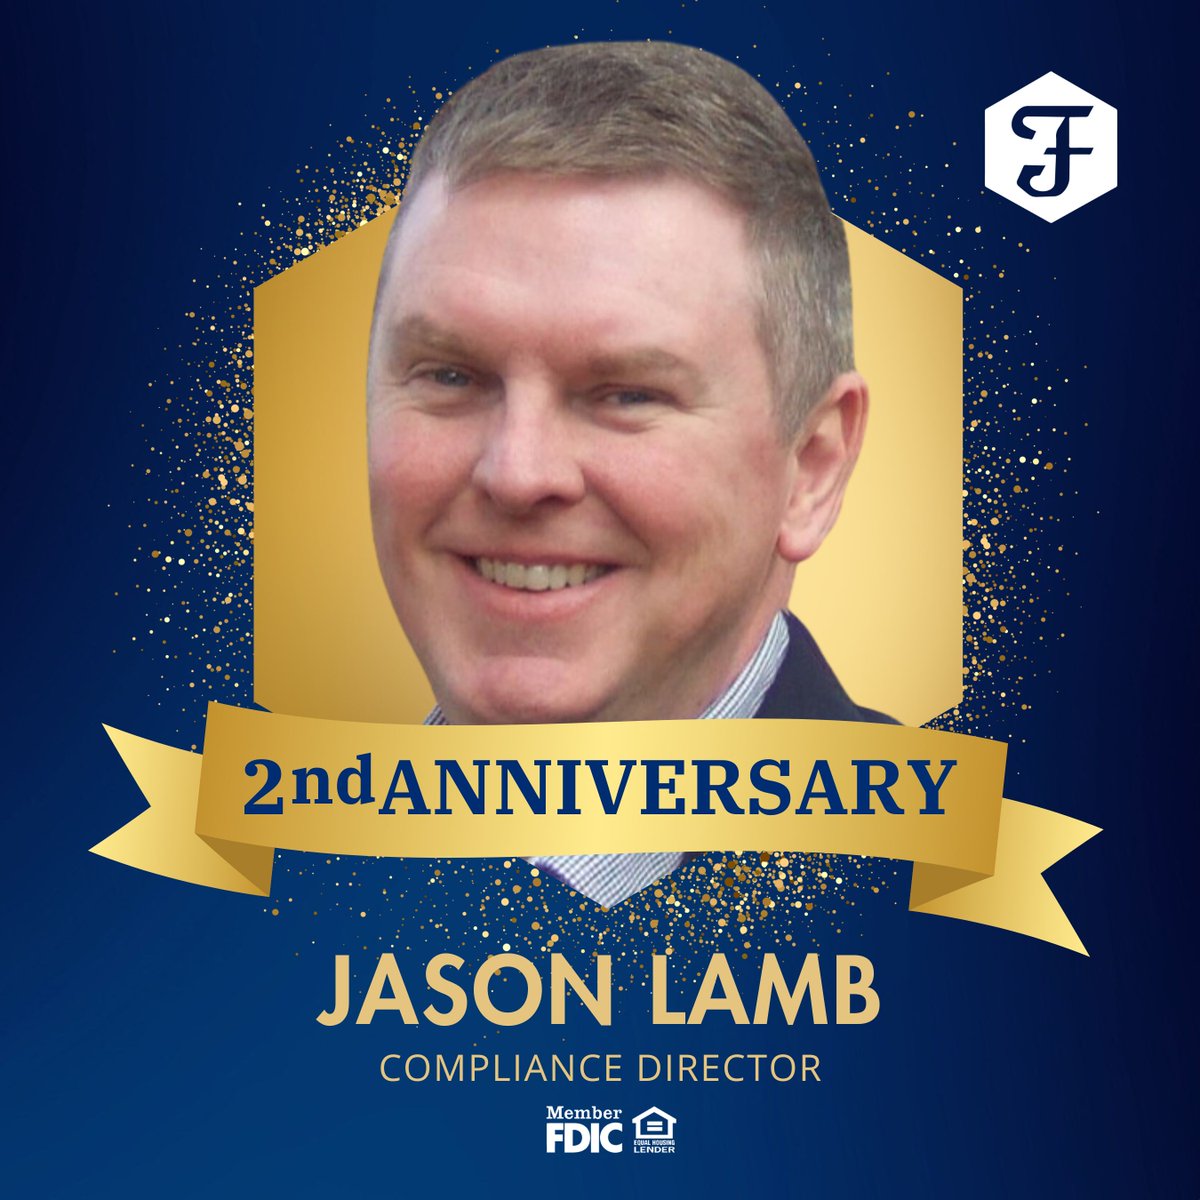 Raising our virtual glasses to two amazing years with our Compliance Director, Jason Lamb. Your fantastic commitment helps us be #HereForGood. Here's to countless more years of making waves! 🎉🎊